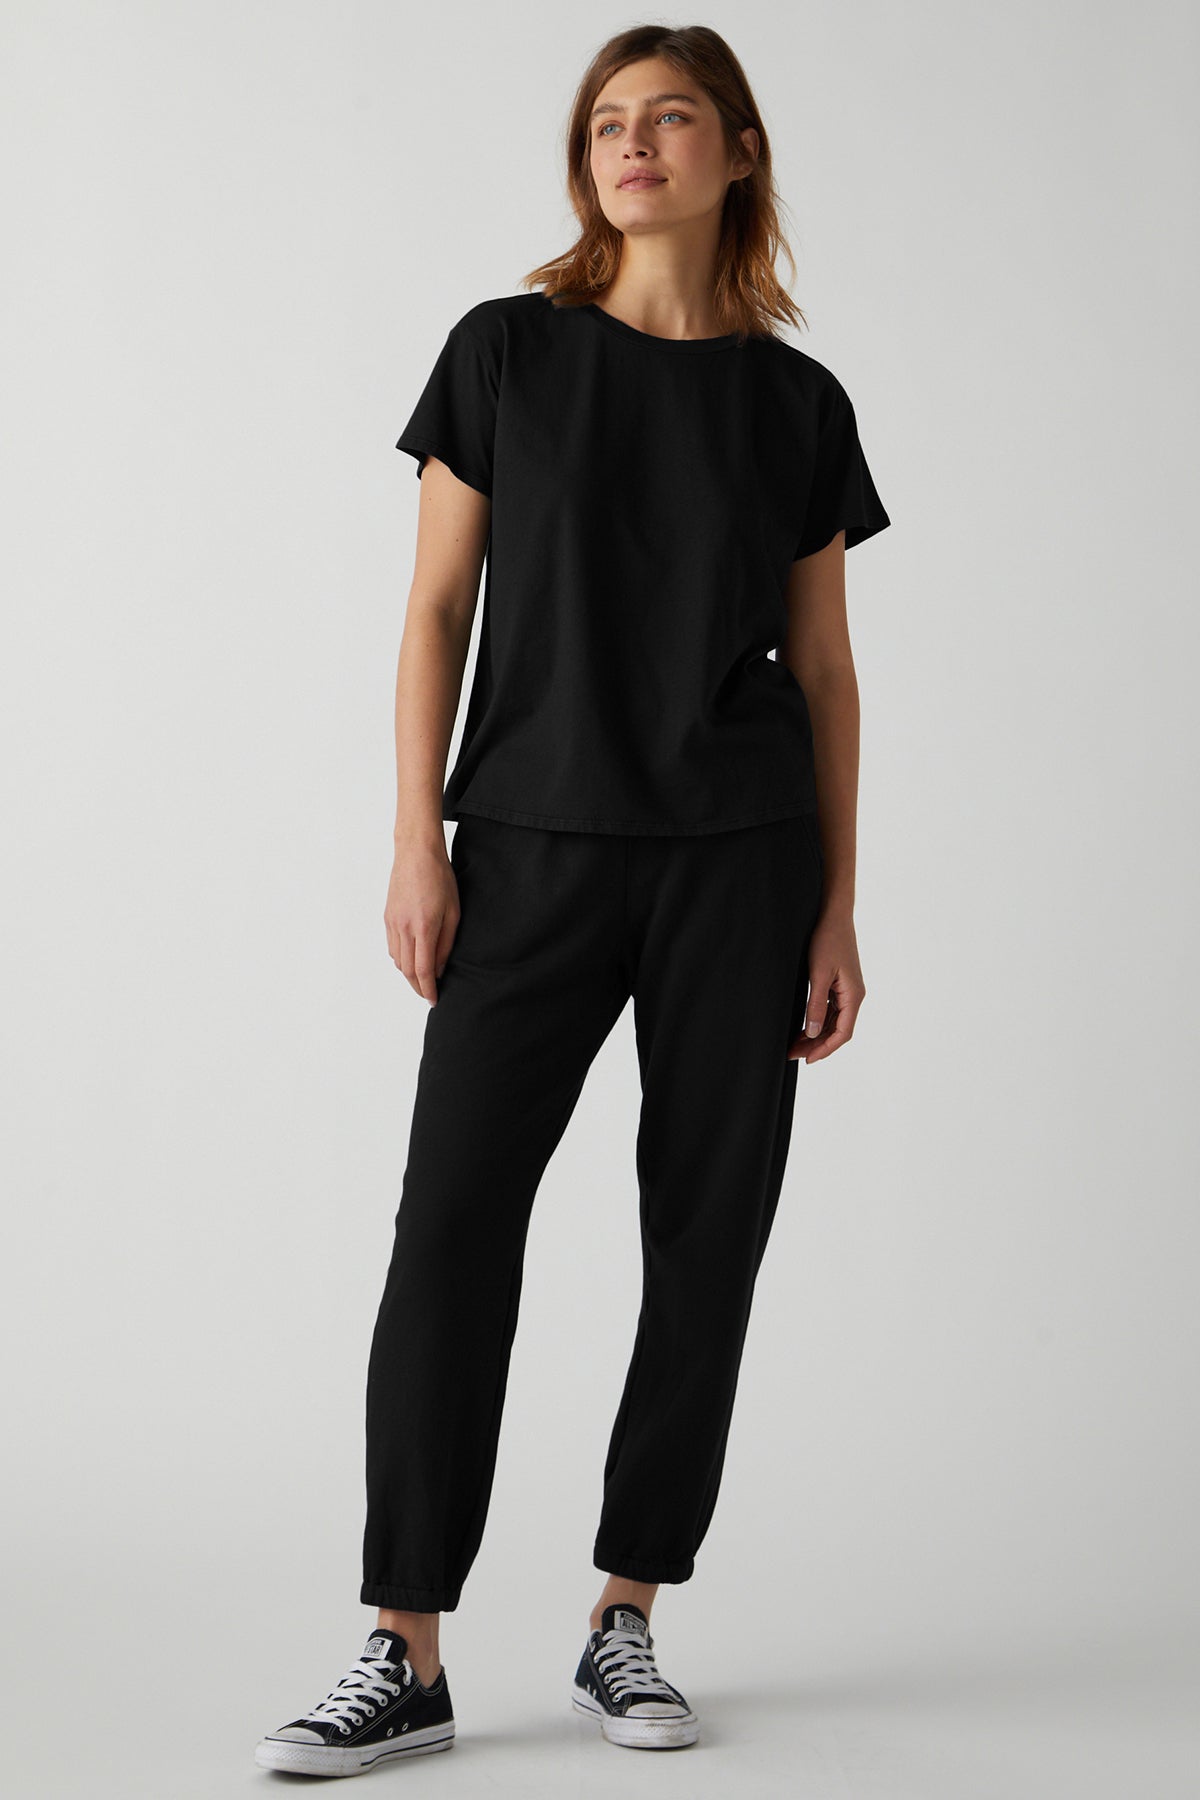 Topanga Tee in black with Zuma Sweatpant full length front with black Converse-26040999182529